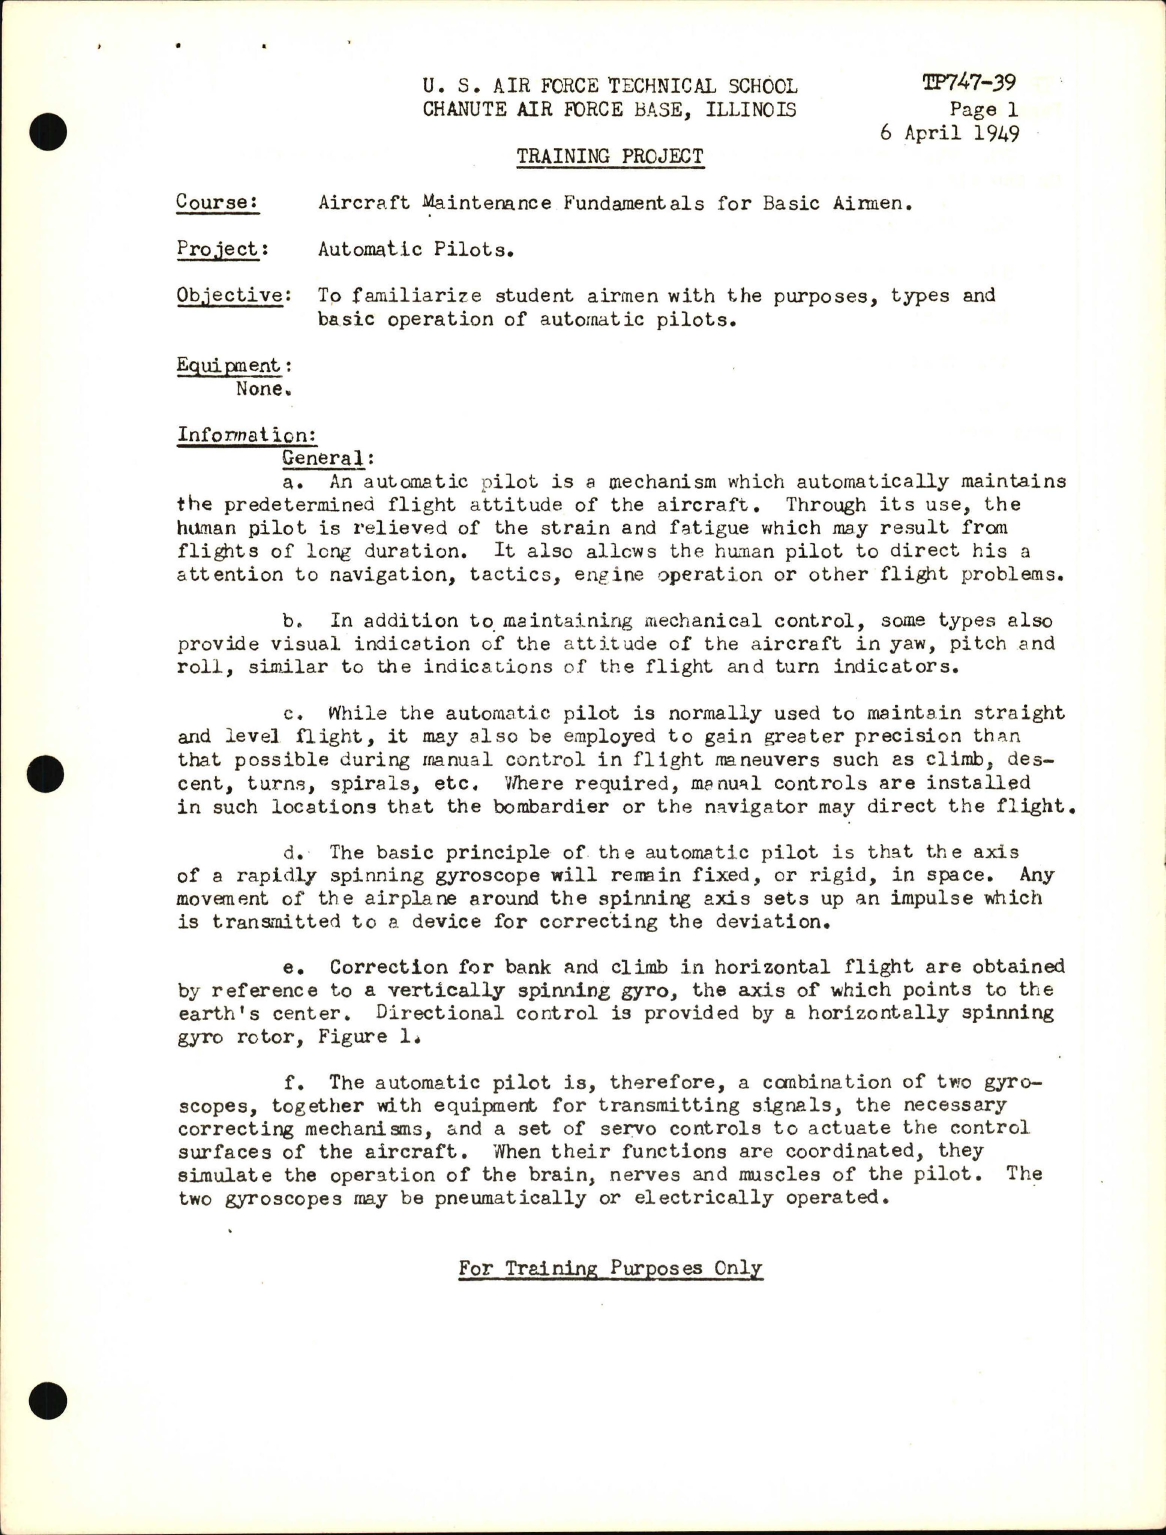 Sample page 1 from AirCorps Library document: Training Project, Automatic Pilots